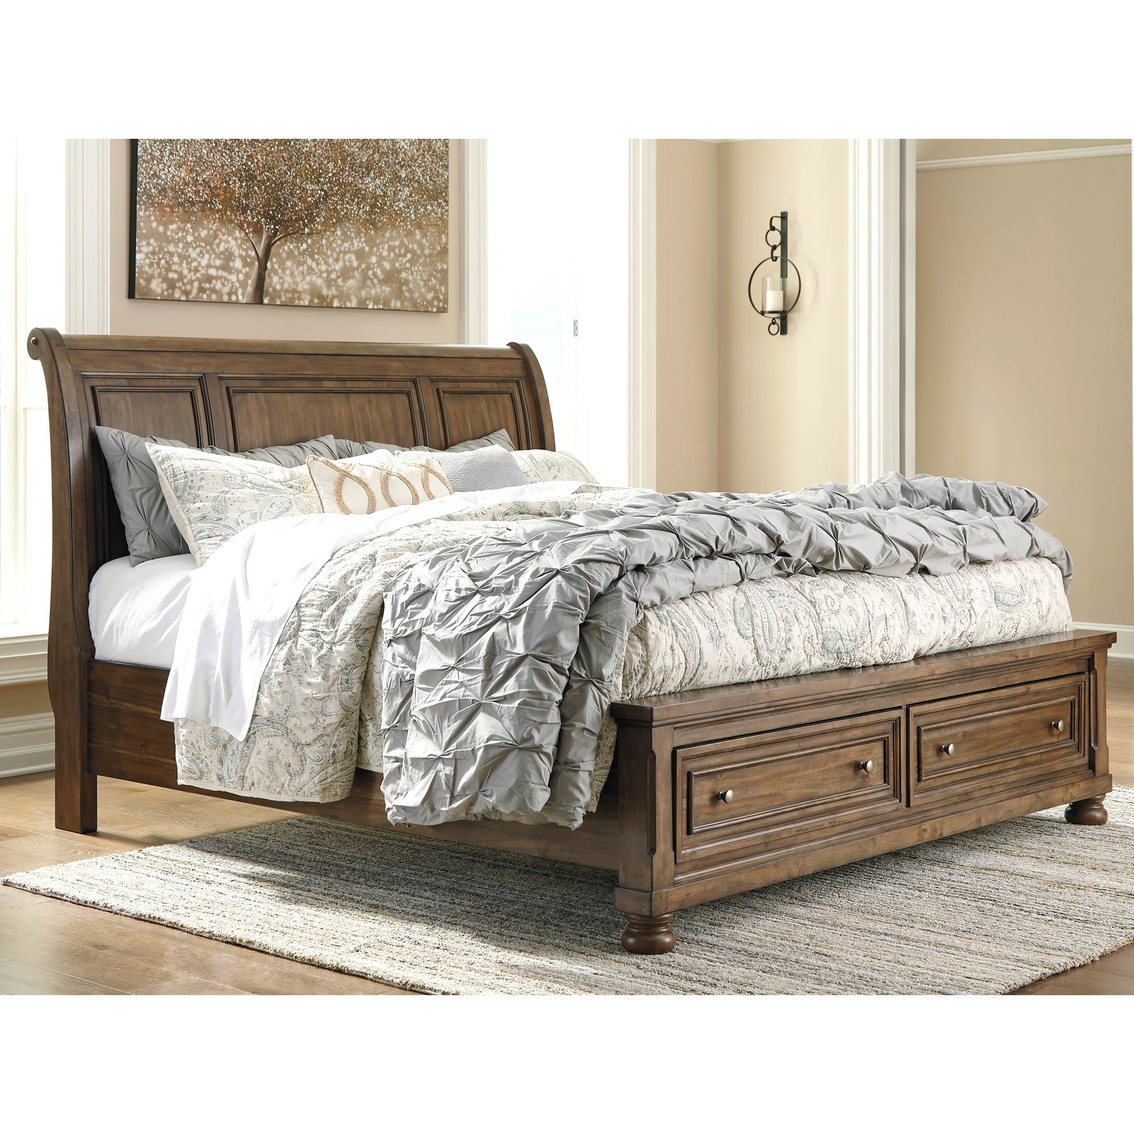 Signature Design by Ashley Flynnter 5 pc. Storage Bed Set - Image 2 of 4